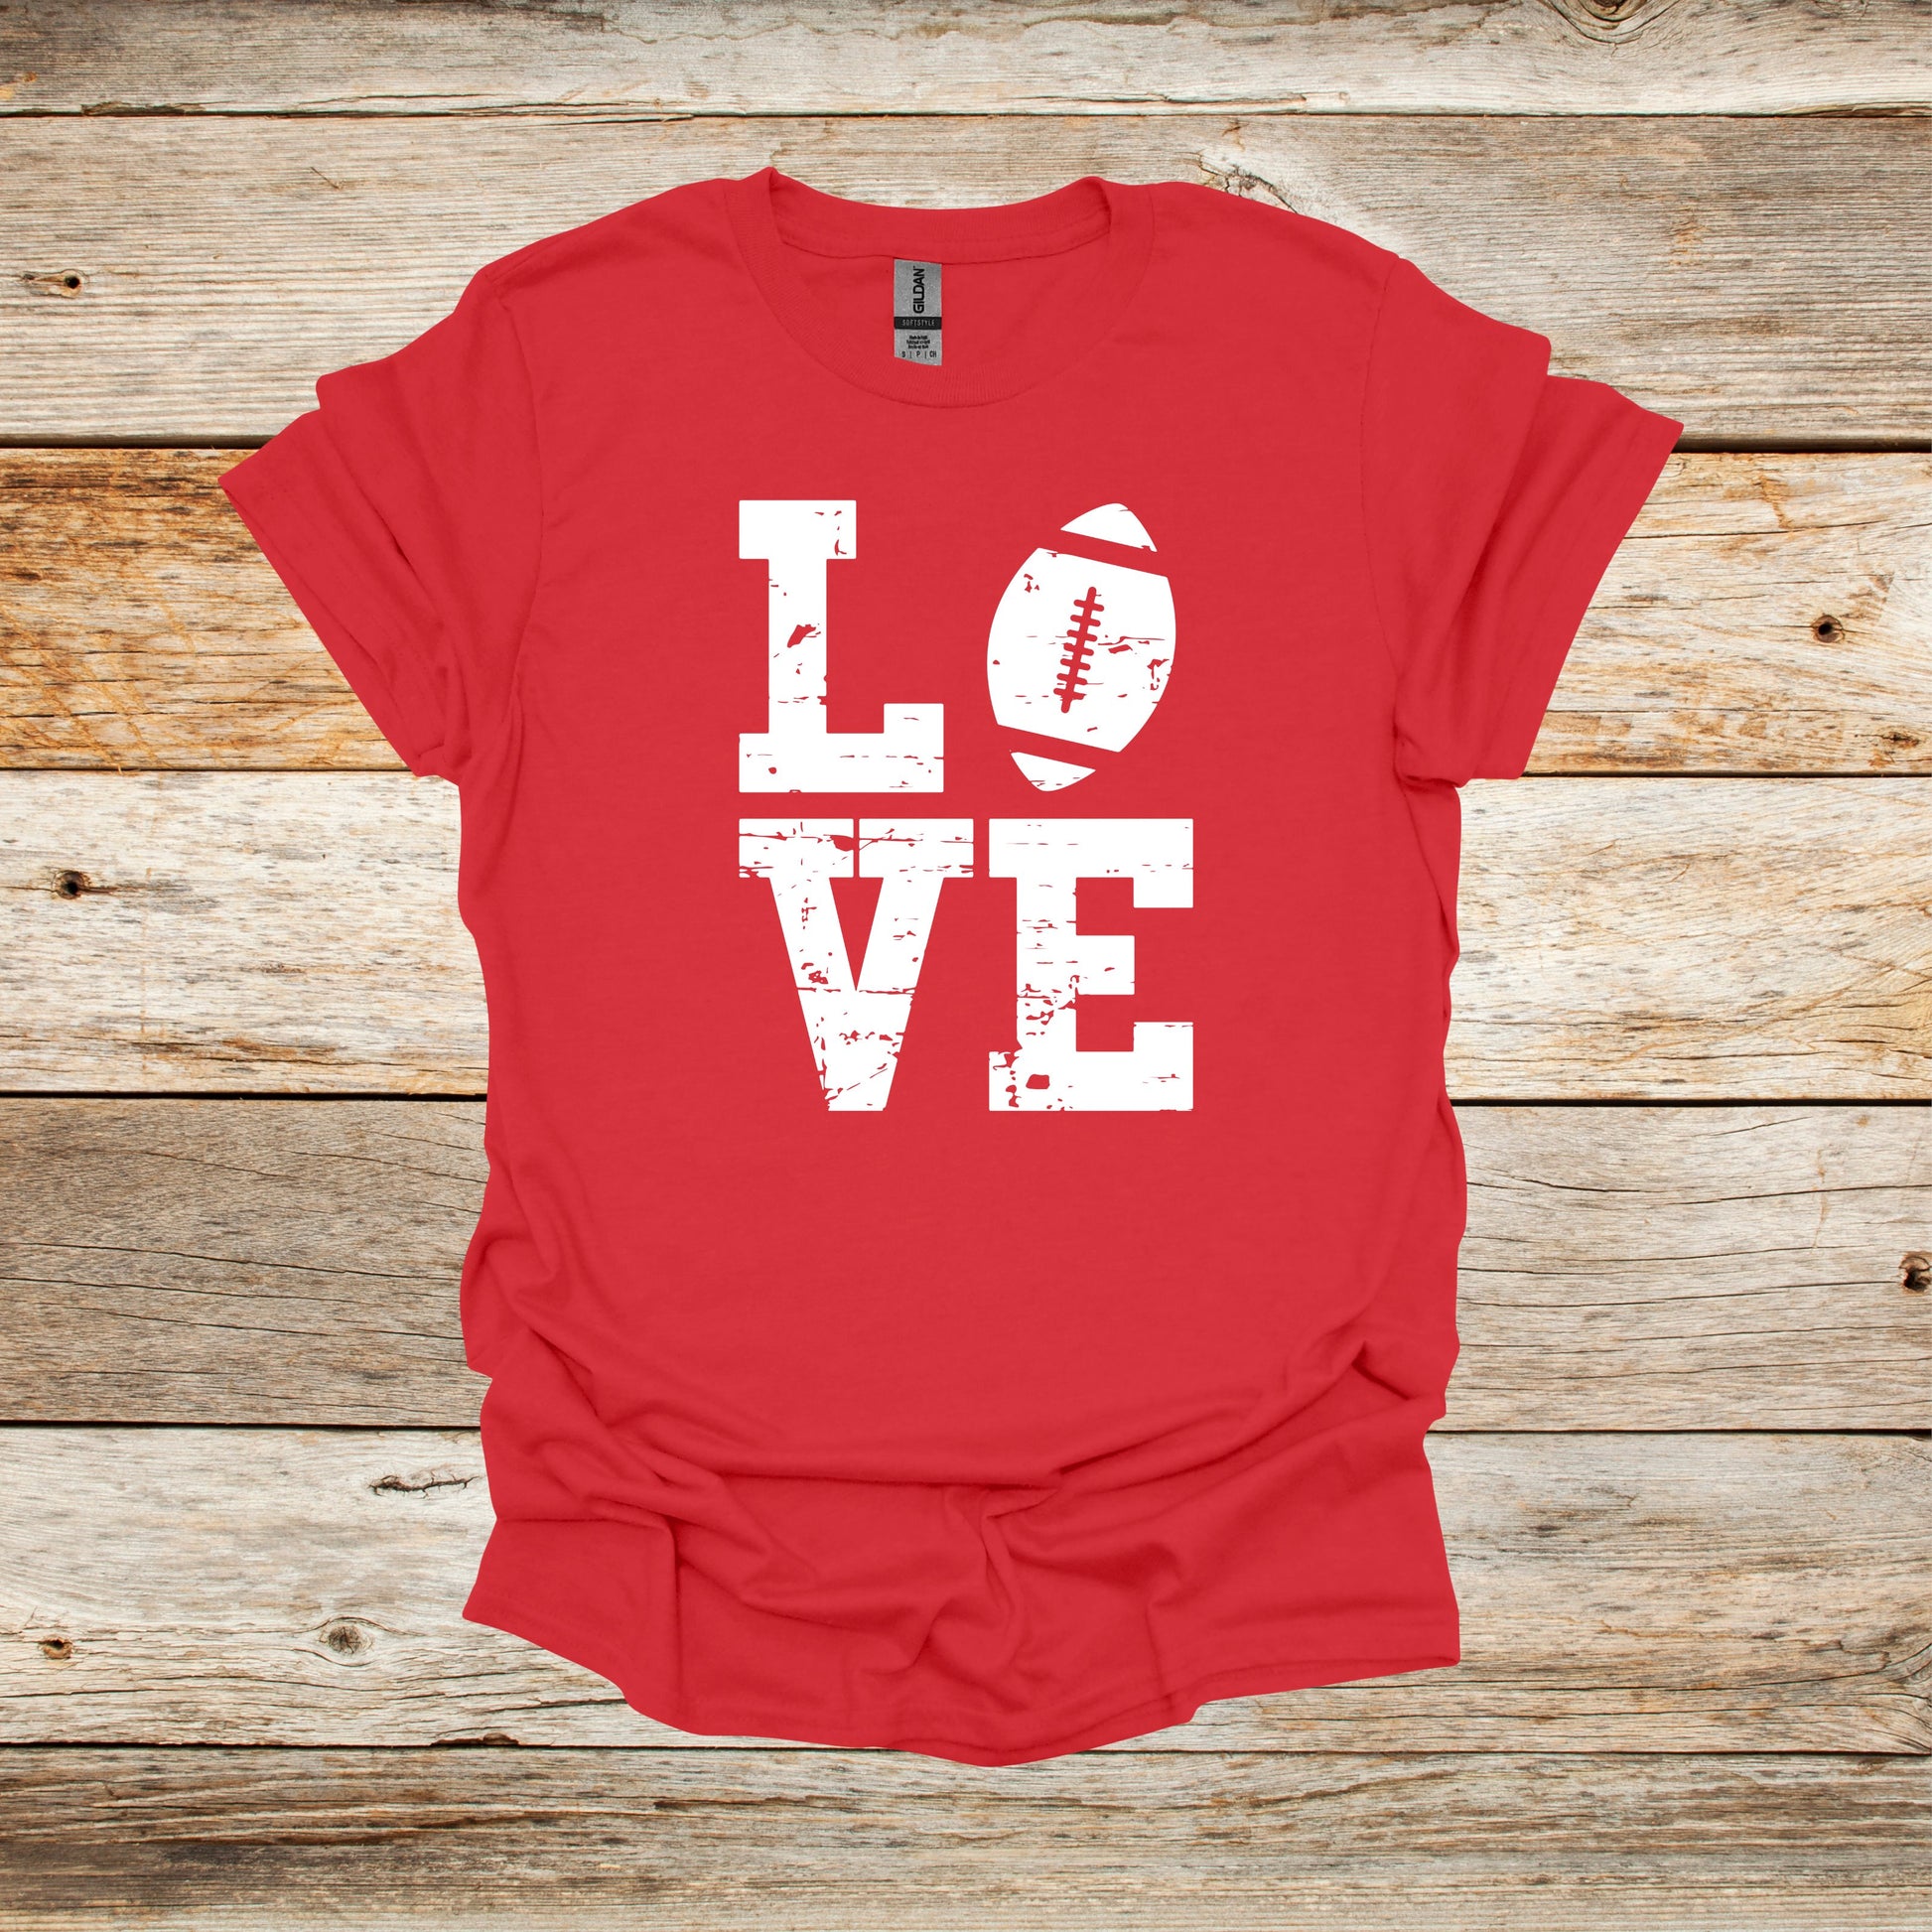 Football T-Shirt - LOVE - Adult and Children's Tee Shirts - Sports T-Shirts Graphic Avenue Red Adult Small 